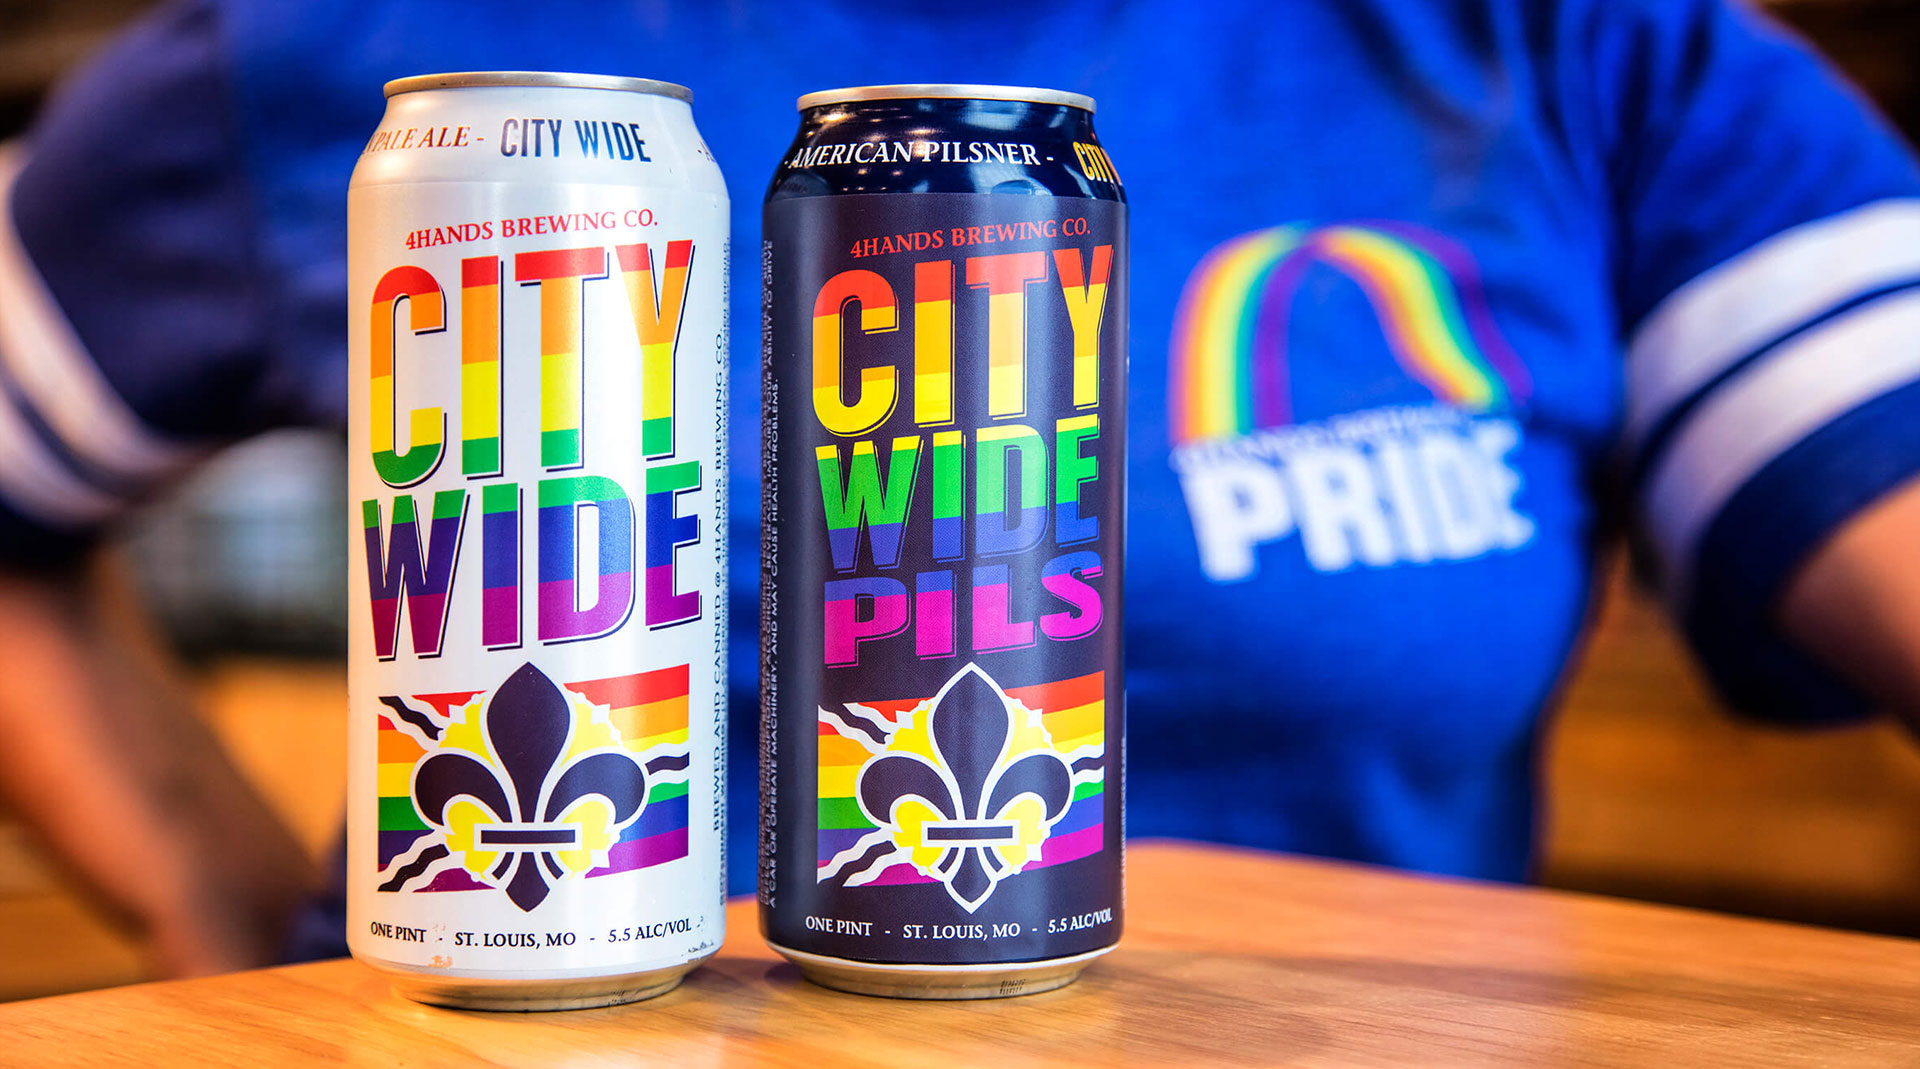 4 hands brewing co.'s city wide pride in st. louis missouri